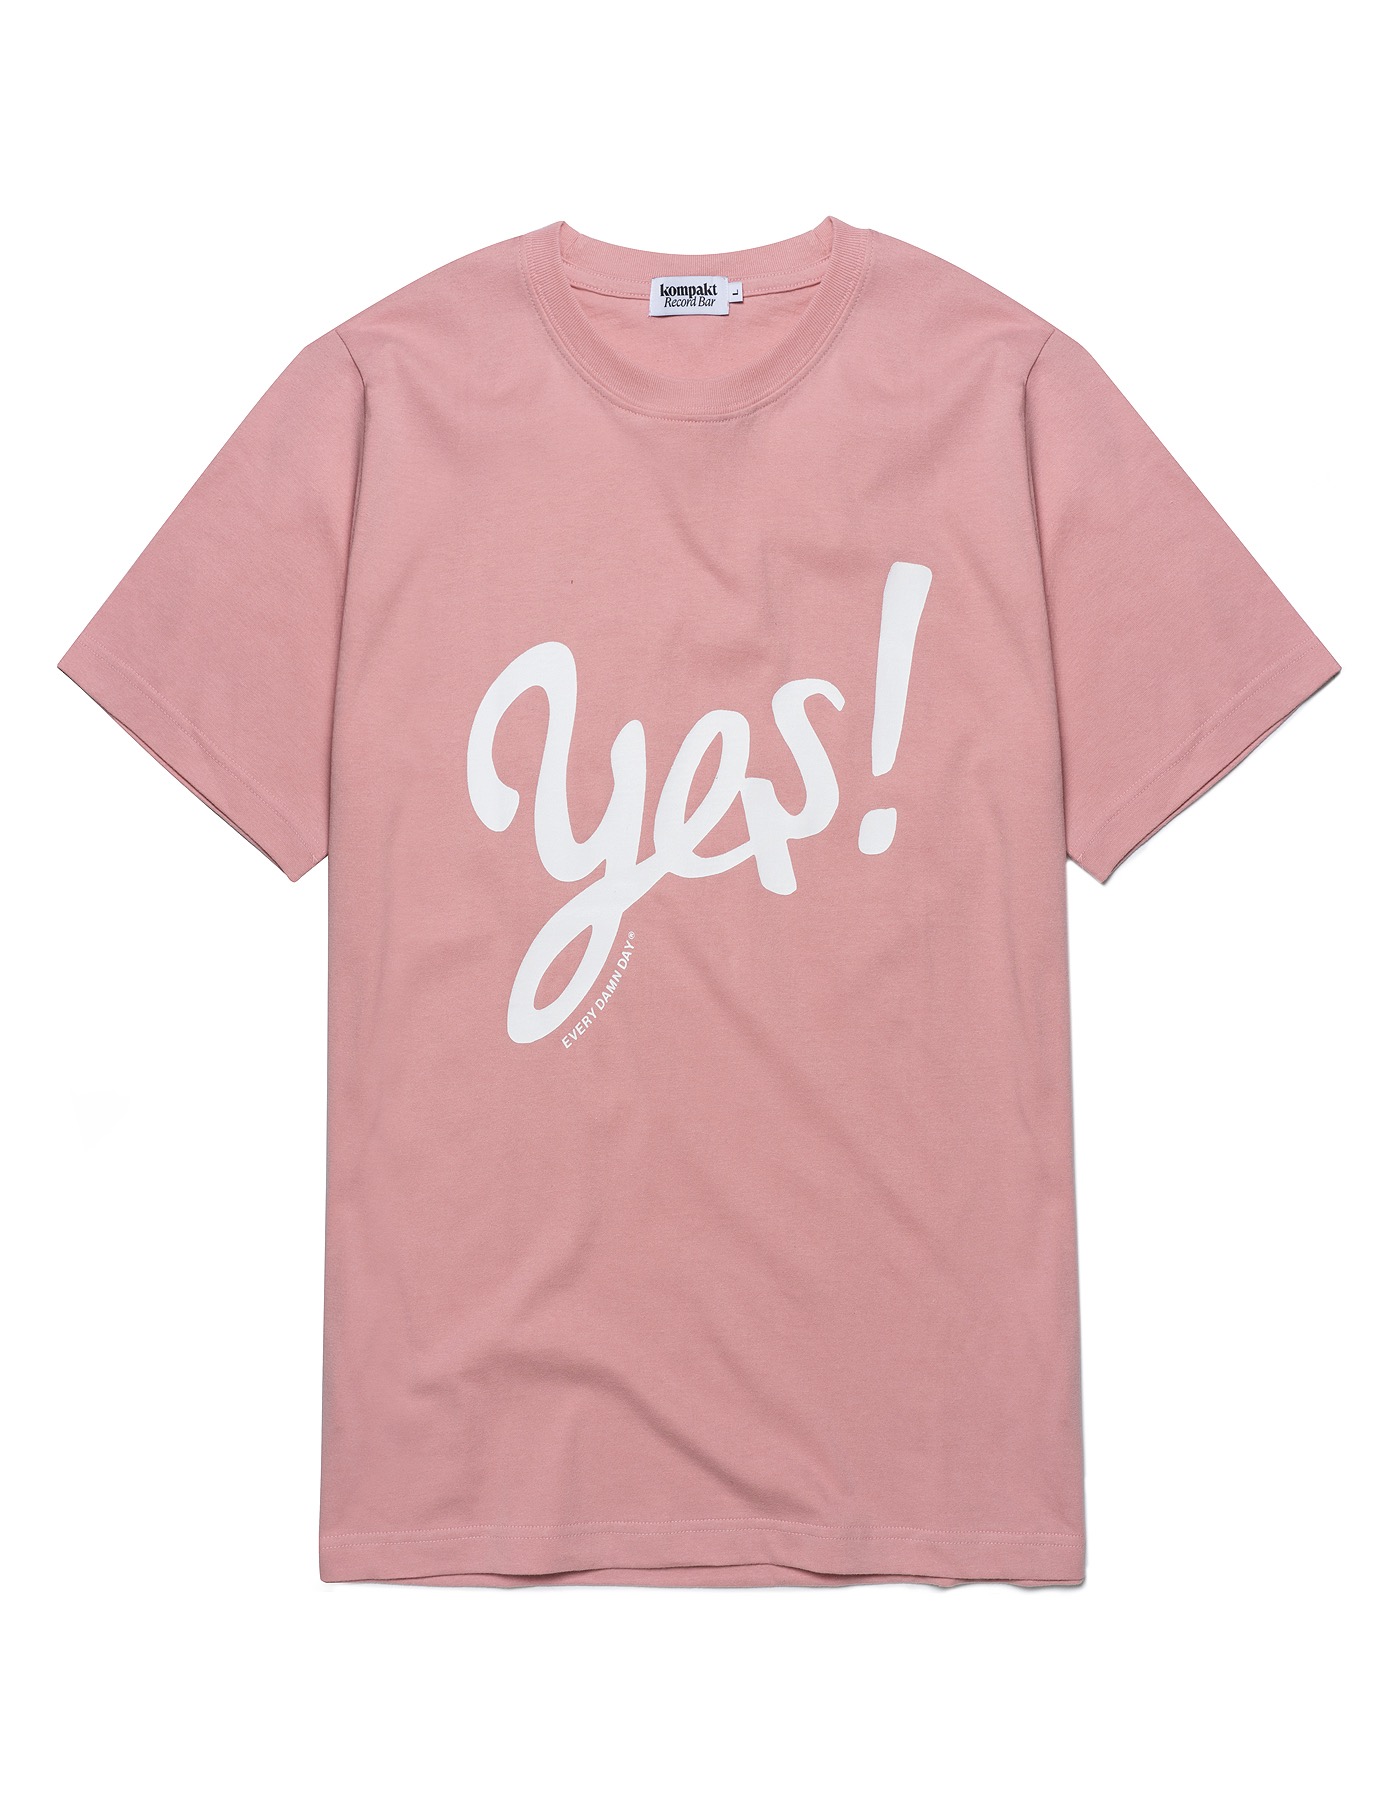 Yes! T-shirts - Pink